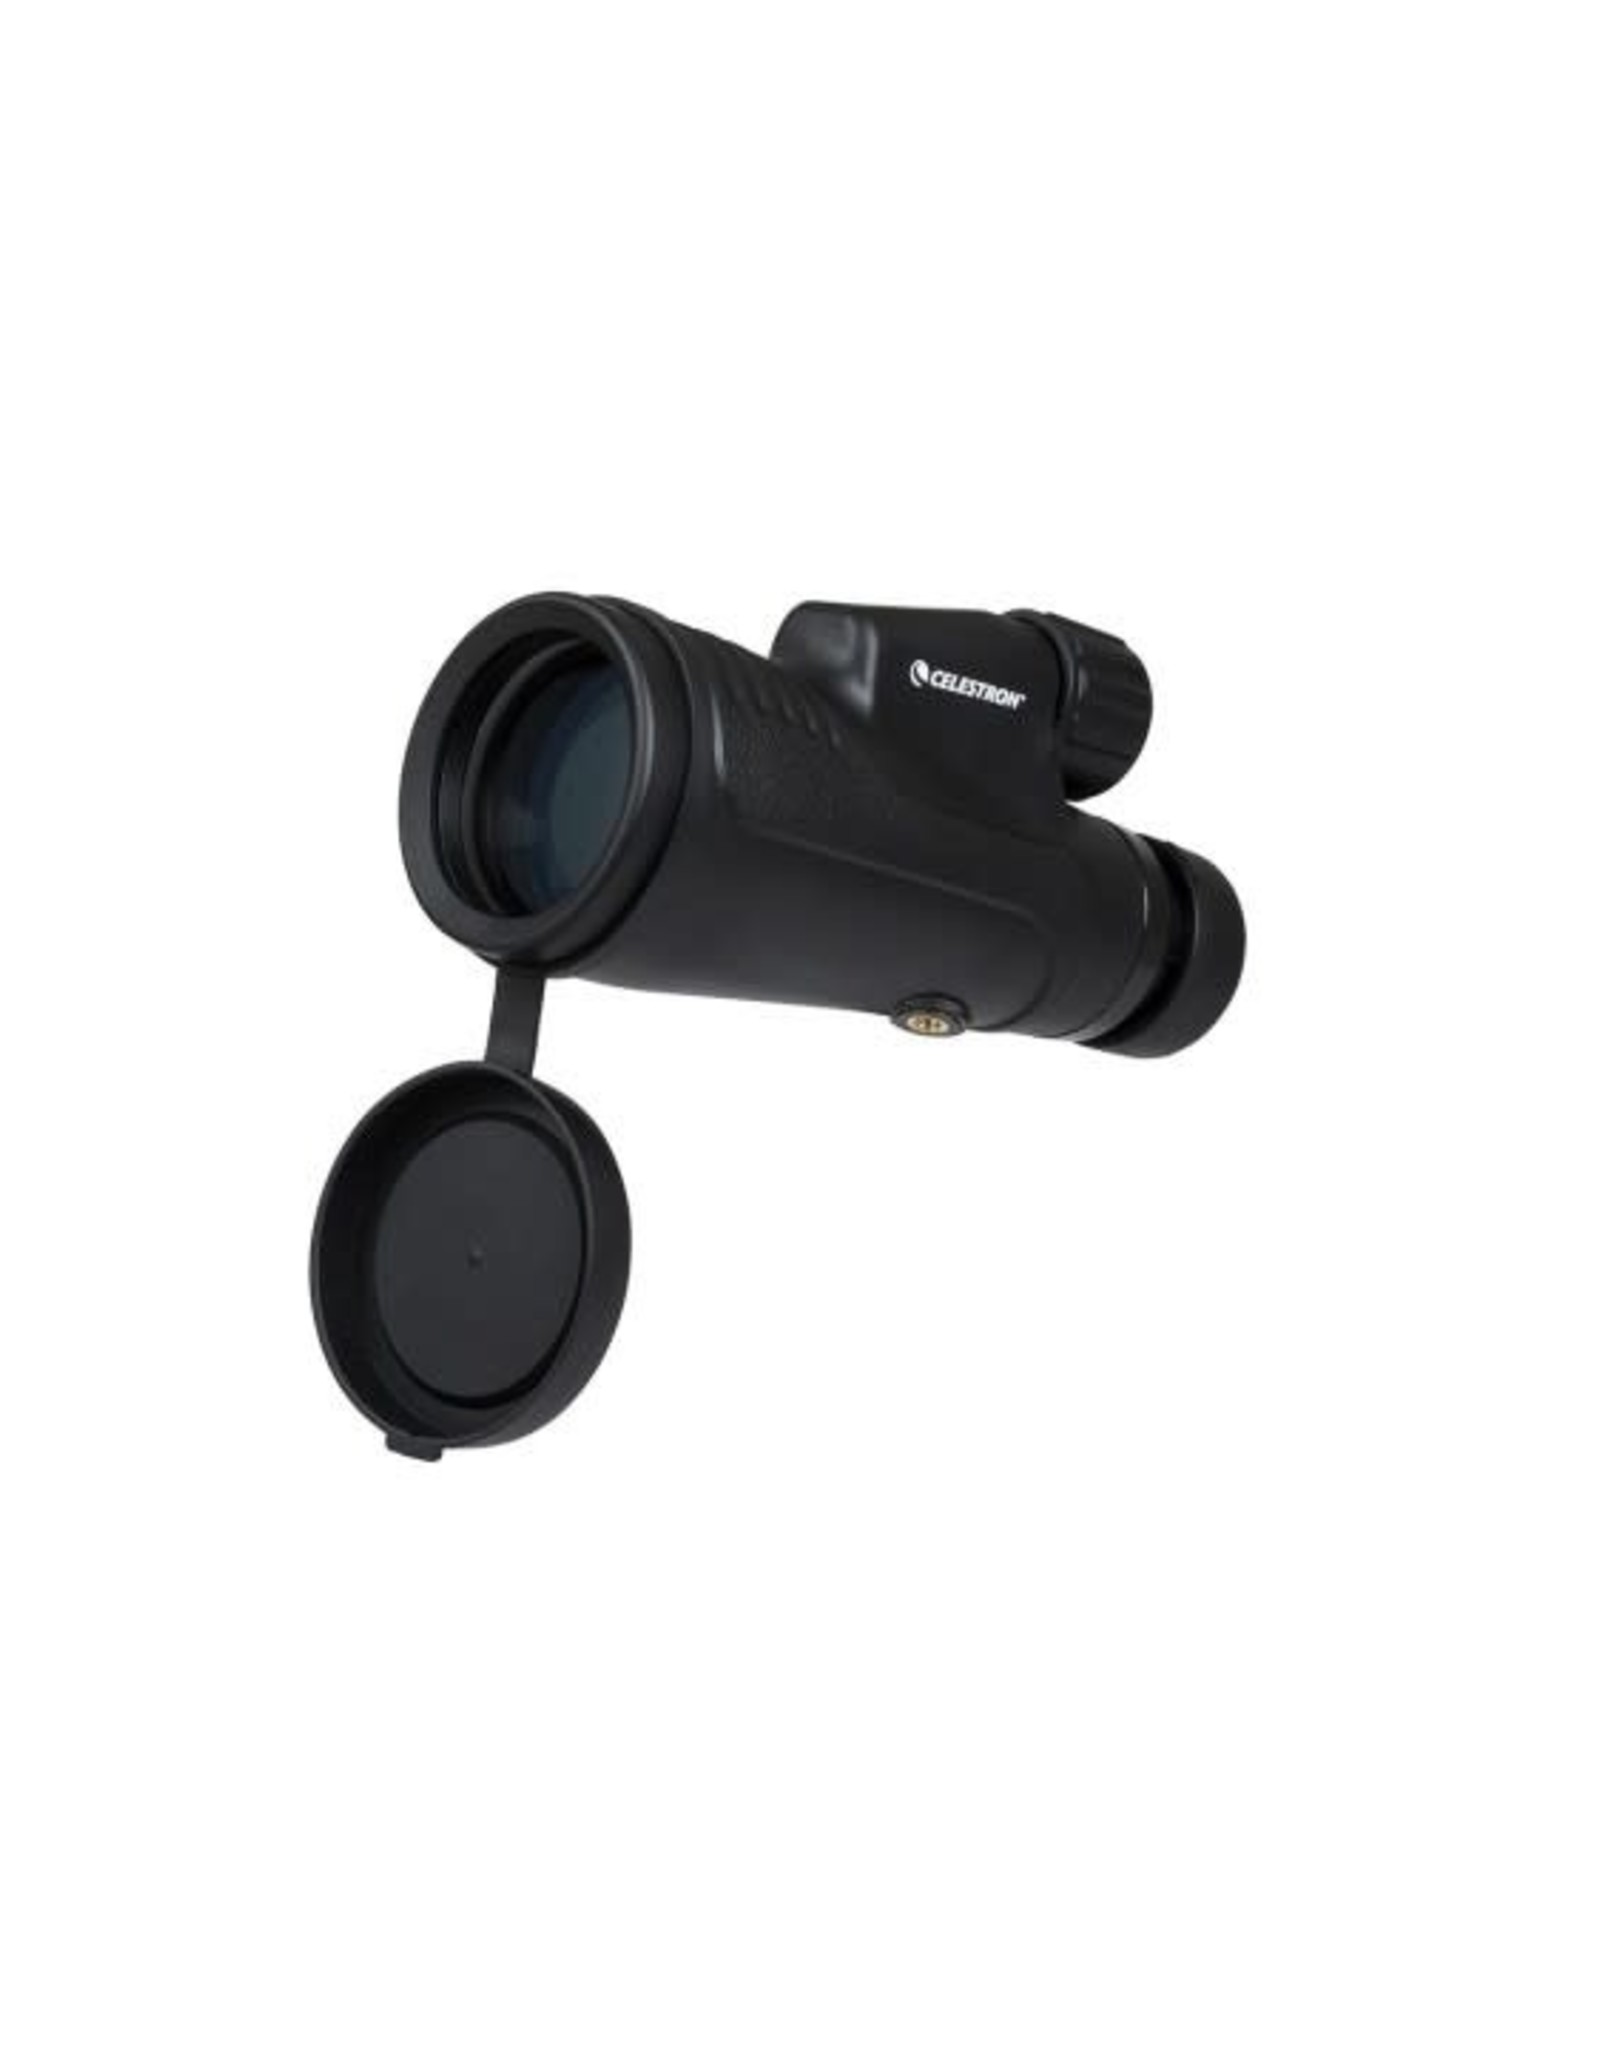 Celestron Celestron 10x50mm Outland X Monocular with Smartphone Adapter